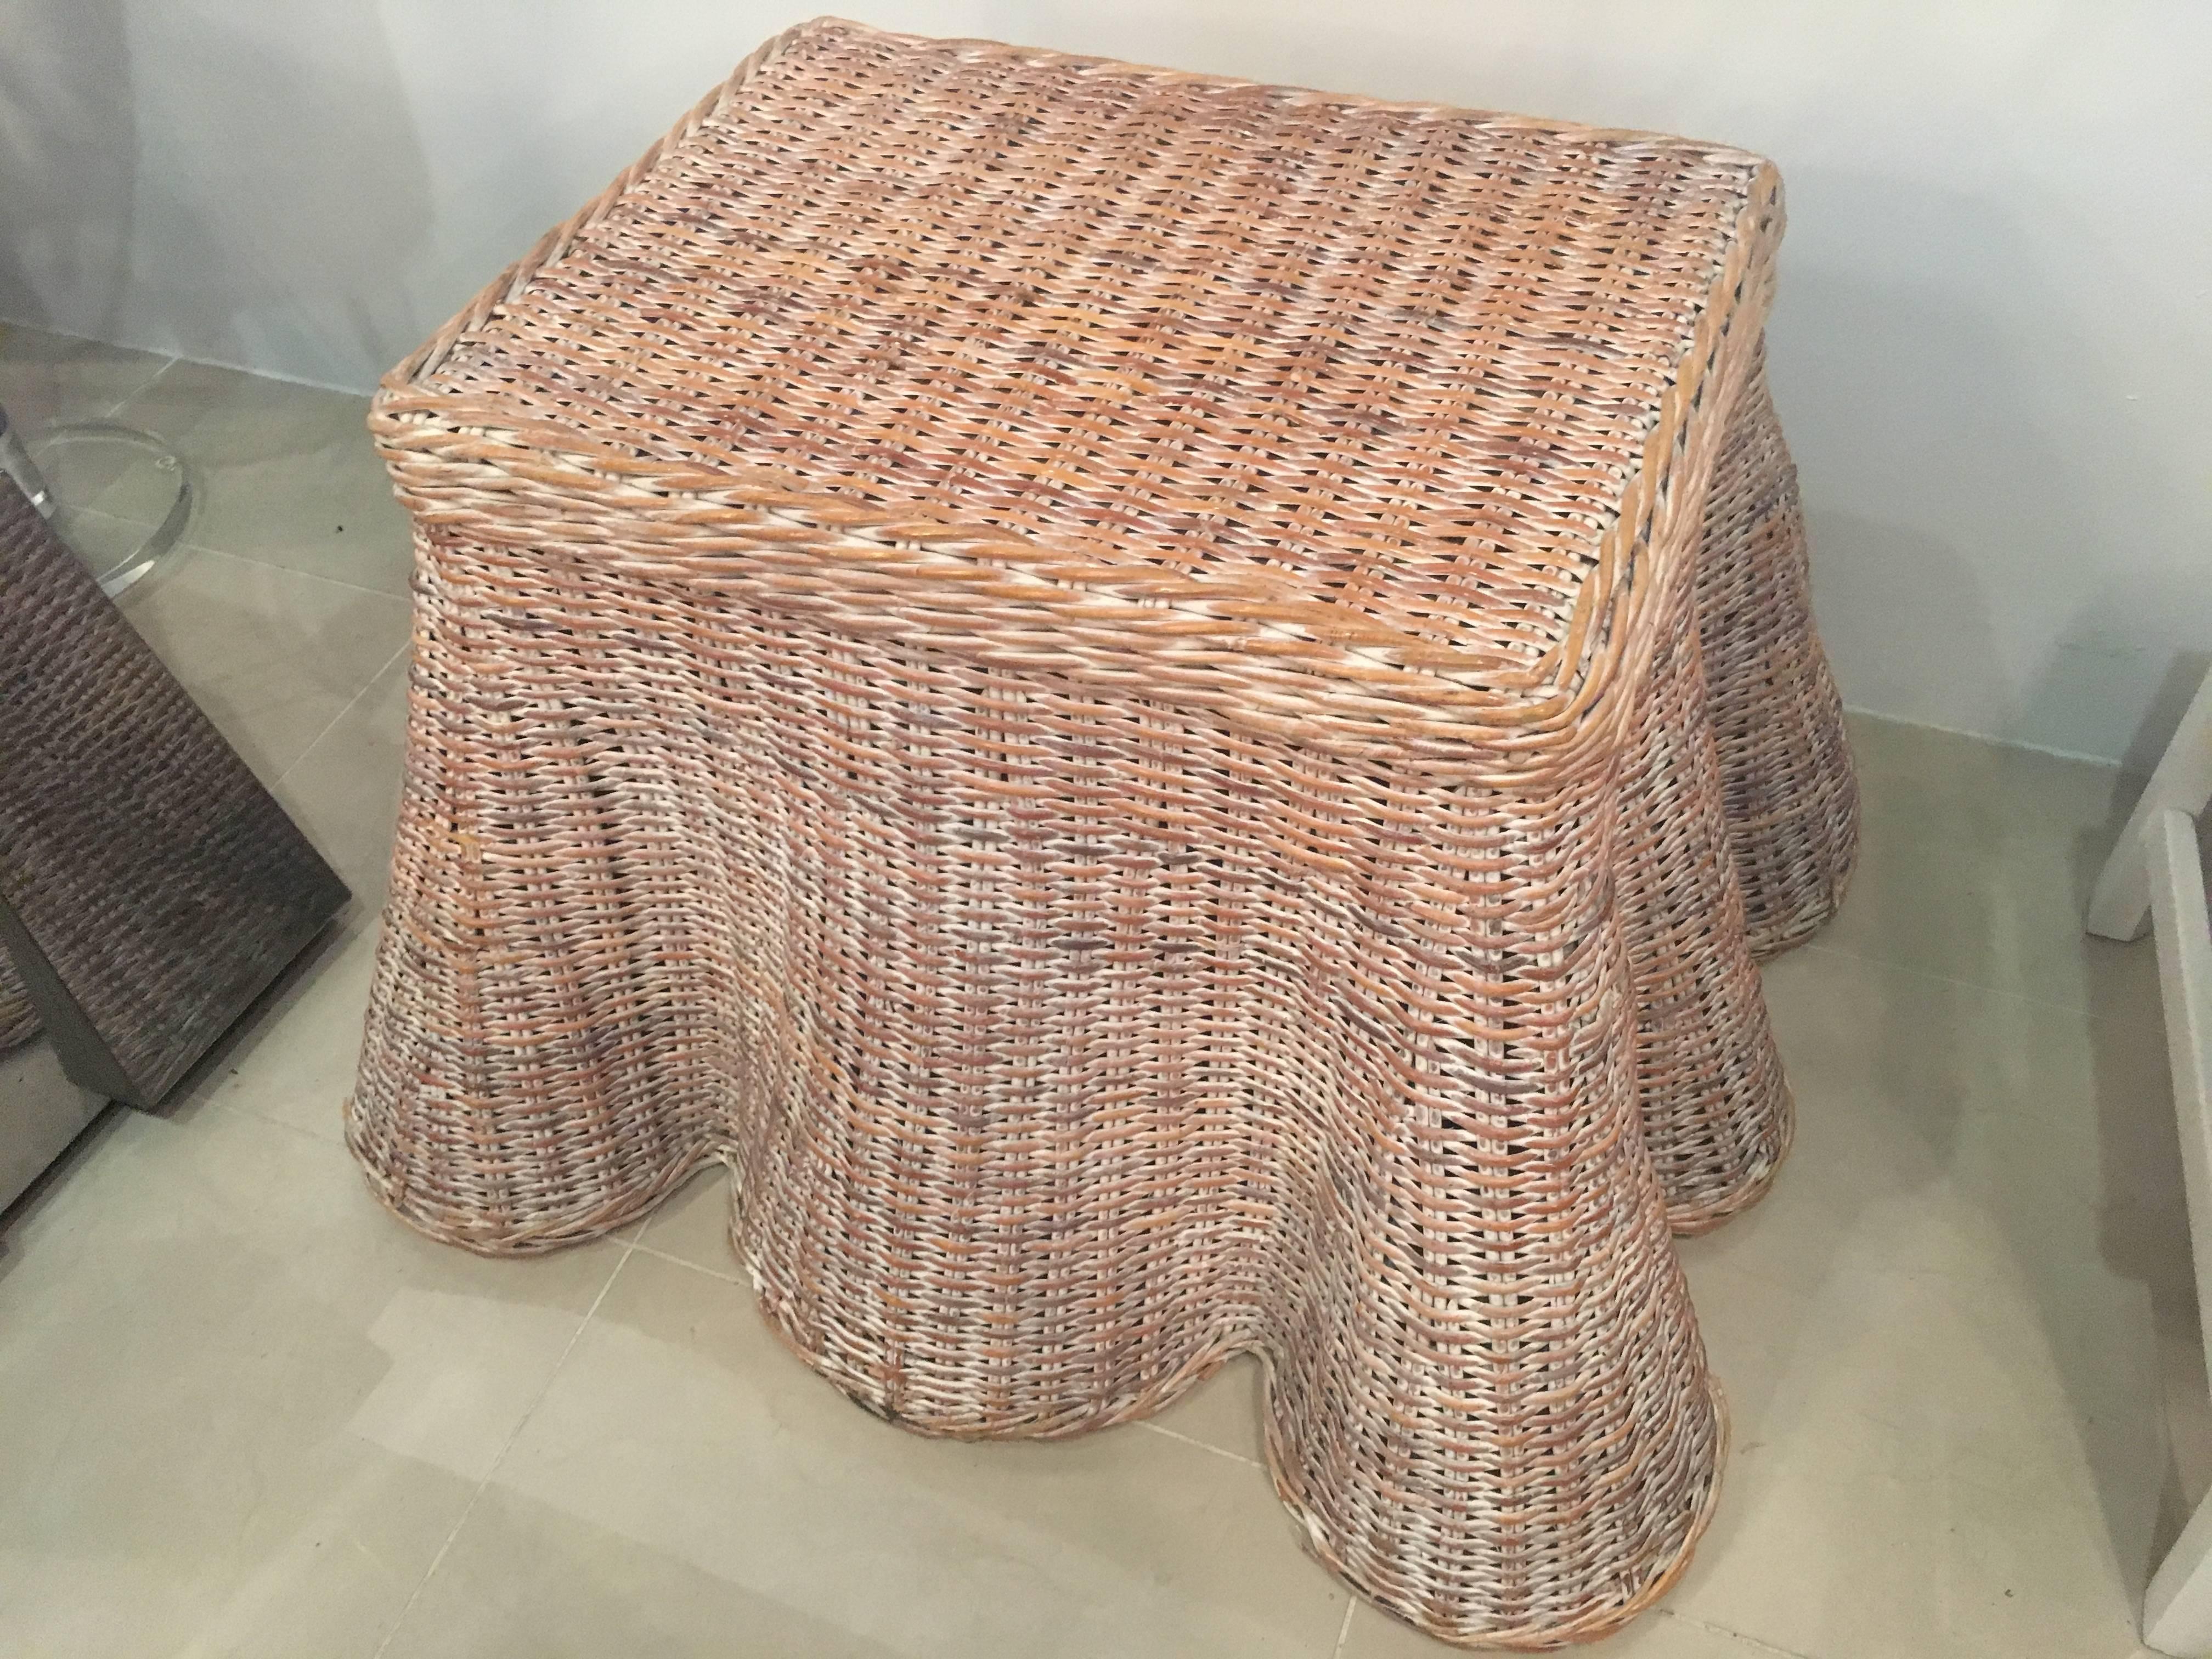 American Draped Wicker Coffee, Cocktail or End Table Vintage